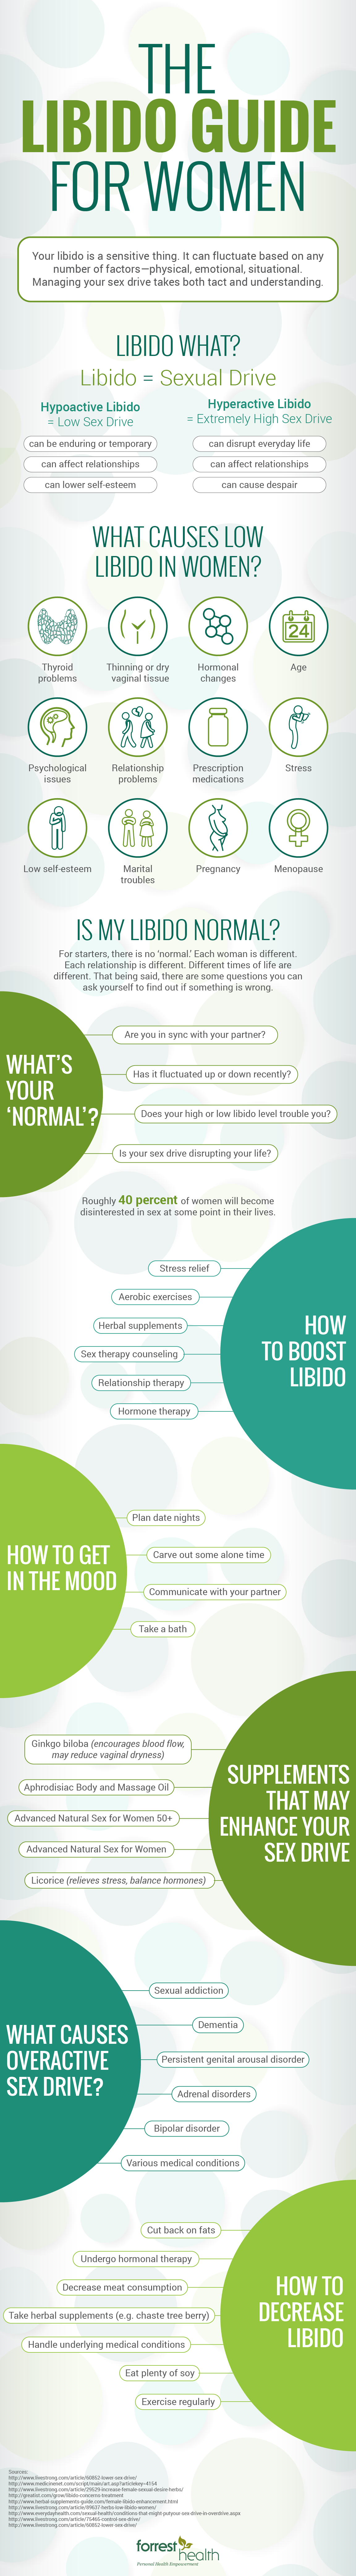 the-libido-guide-for-women-infographic